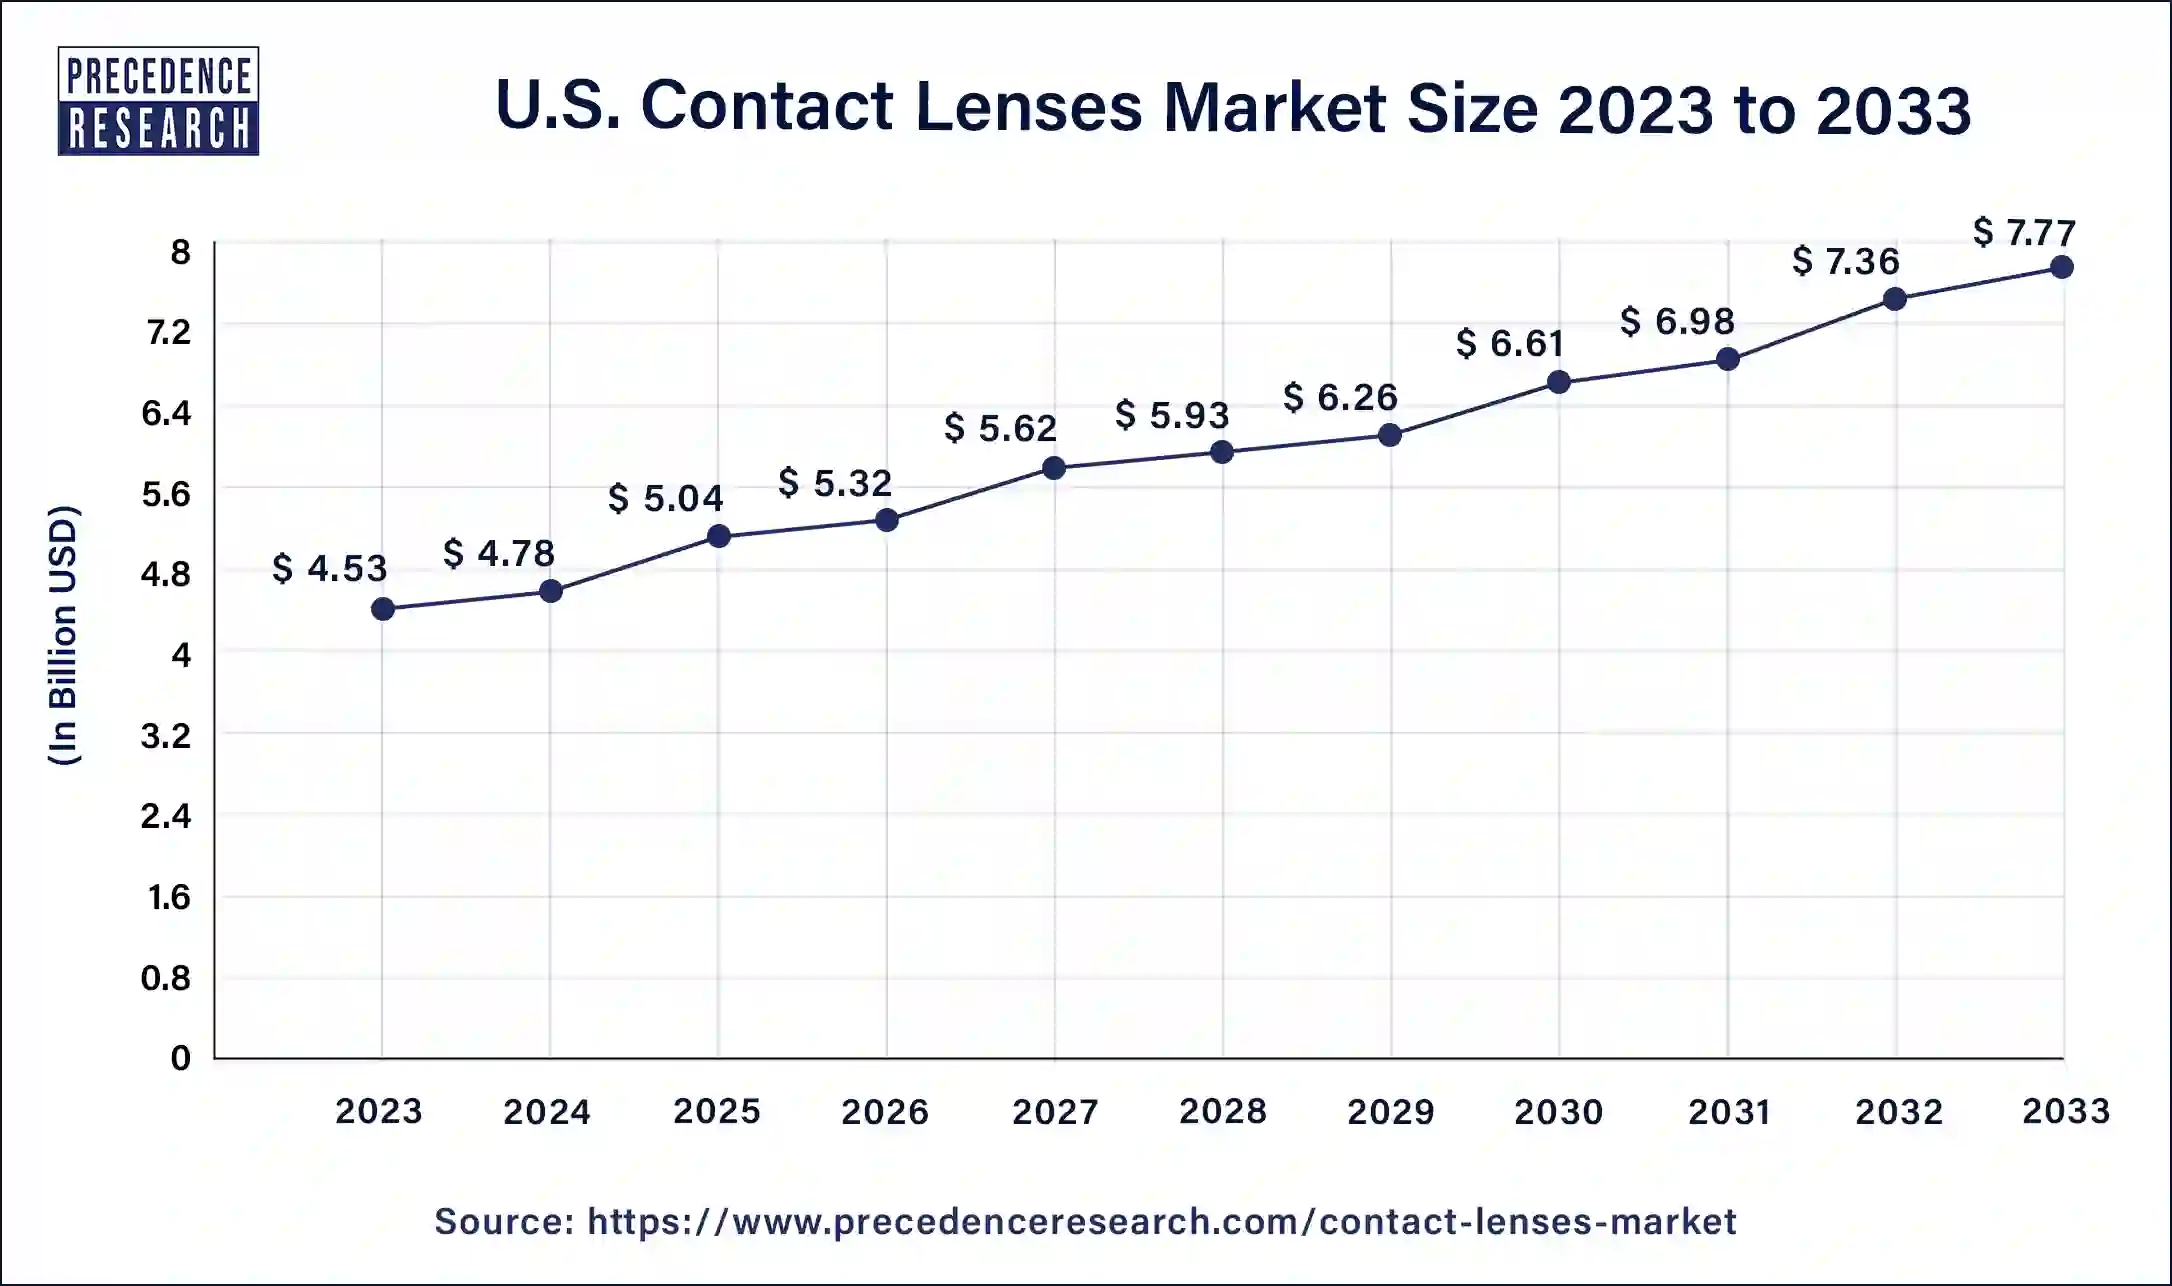 U.S. Contact Lenses Market Size 2024 to 2033